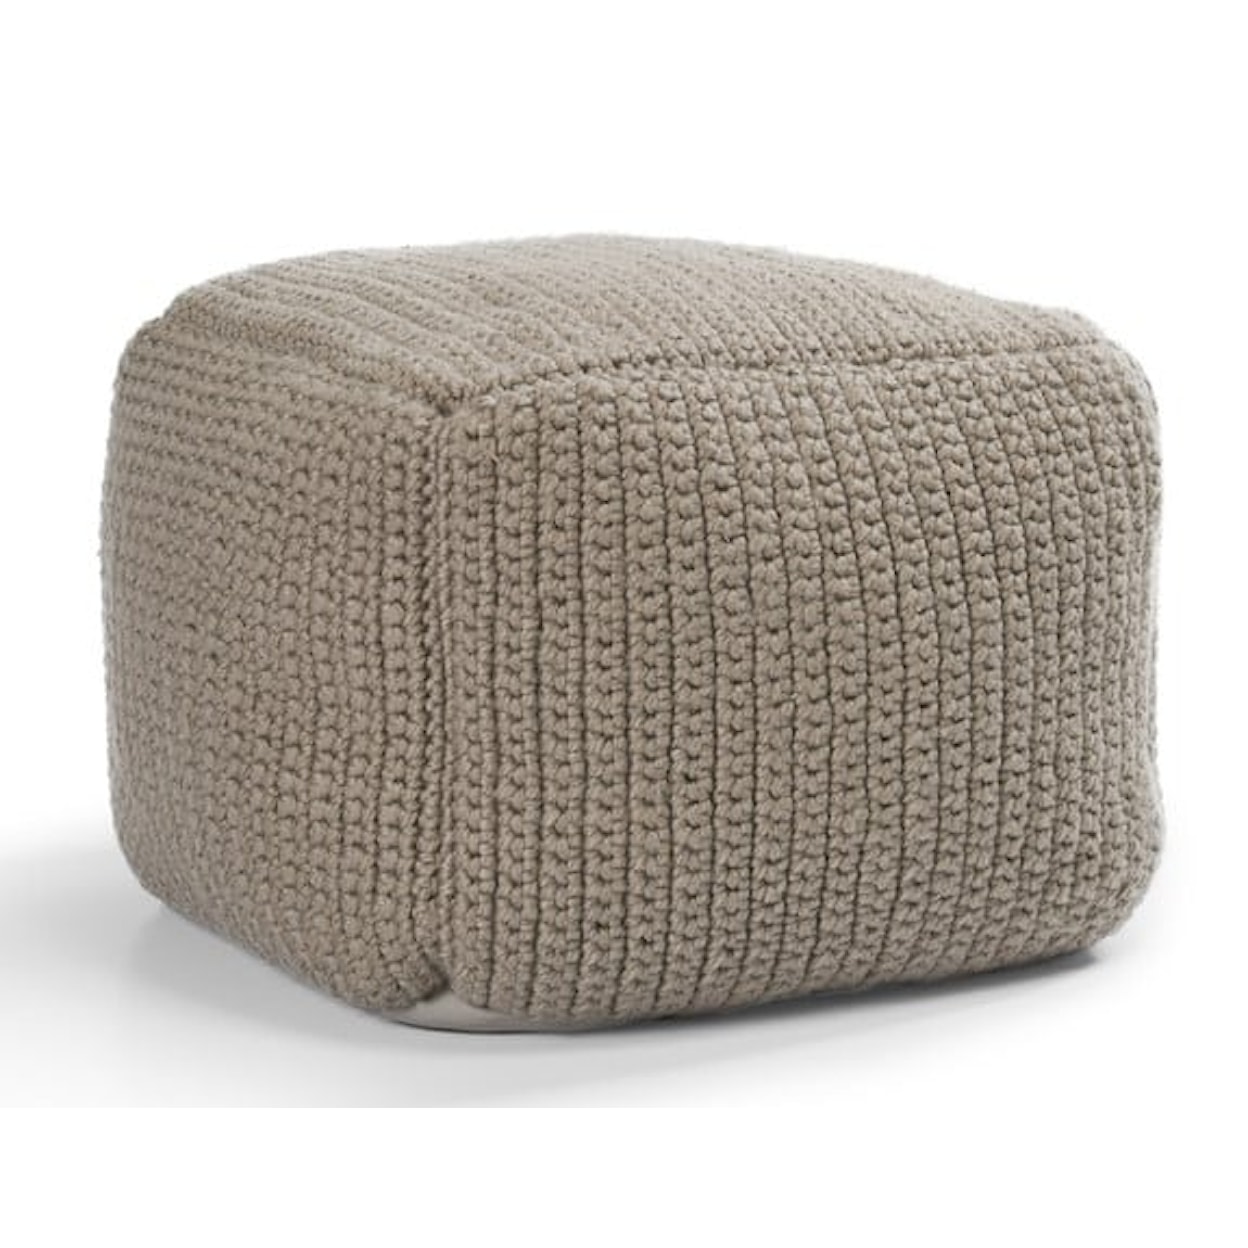 Classic Home Floor Cushions PERFORMANCE PRISM NATURAL POUF